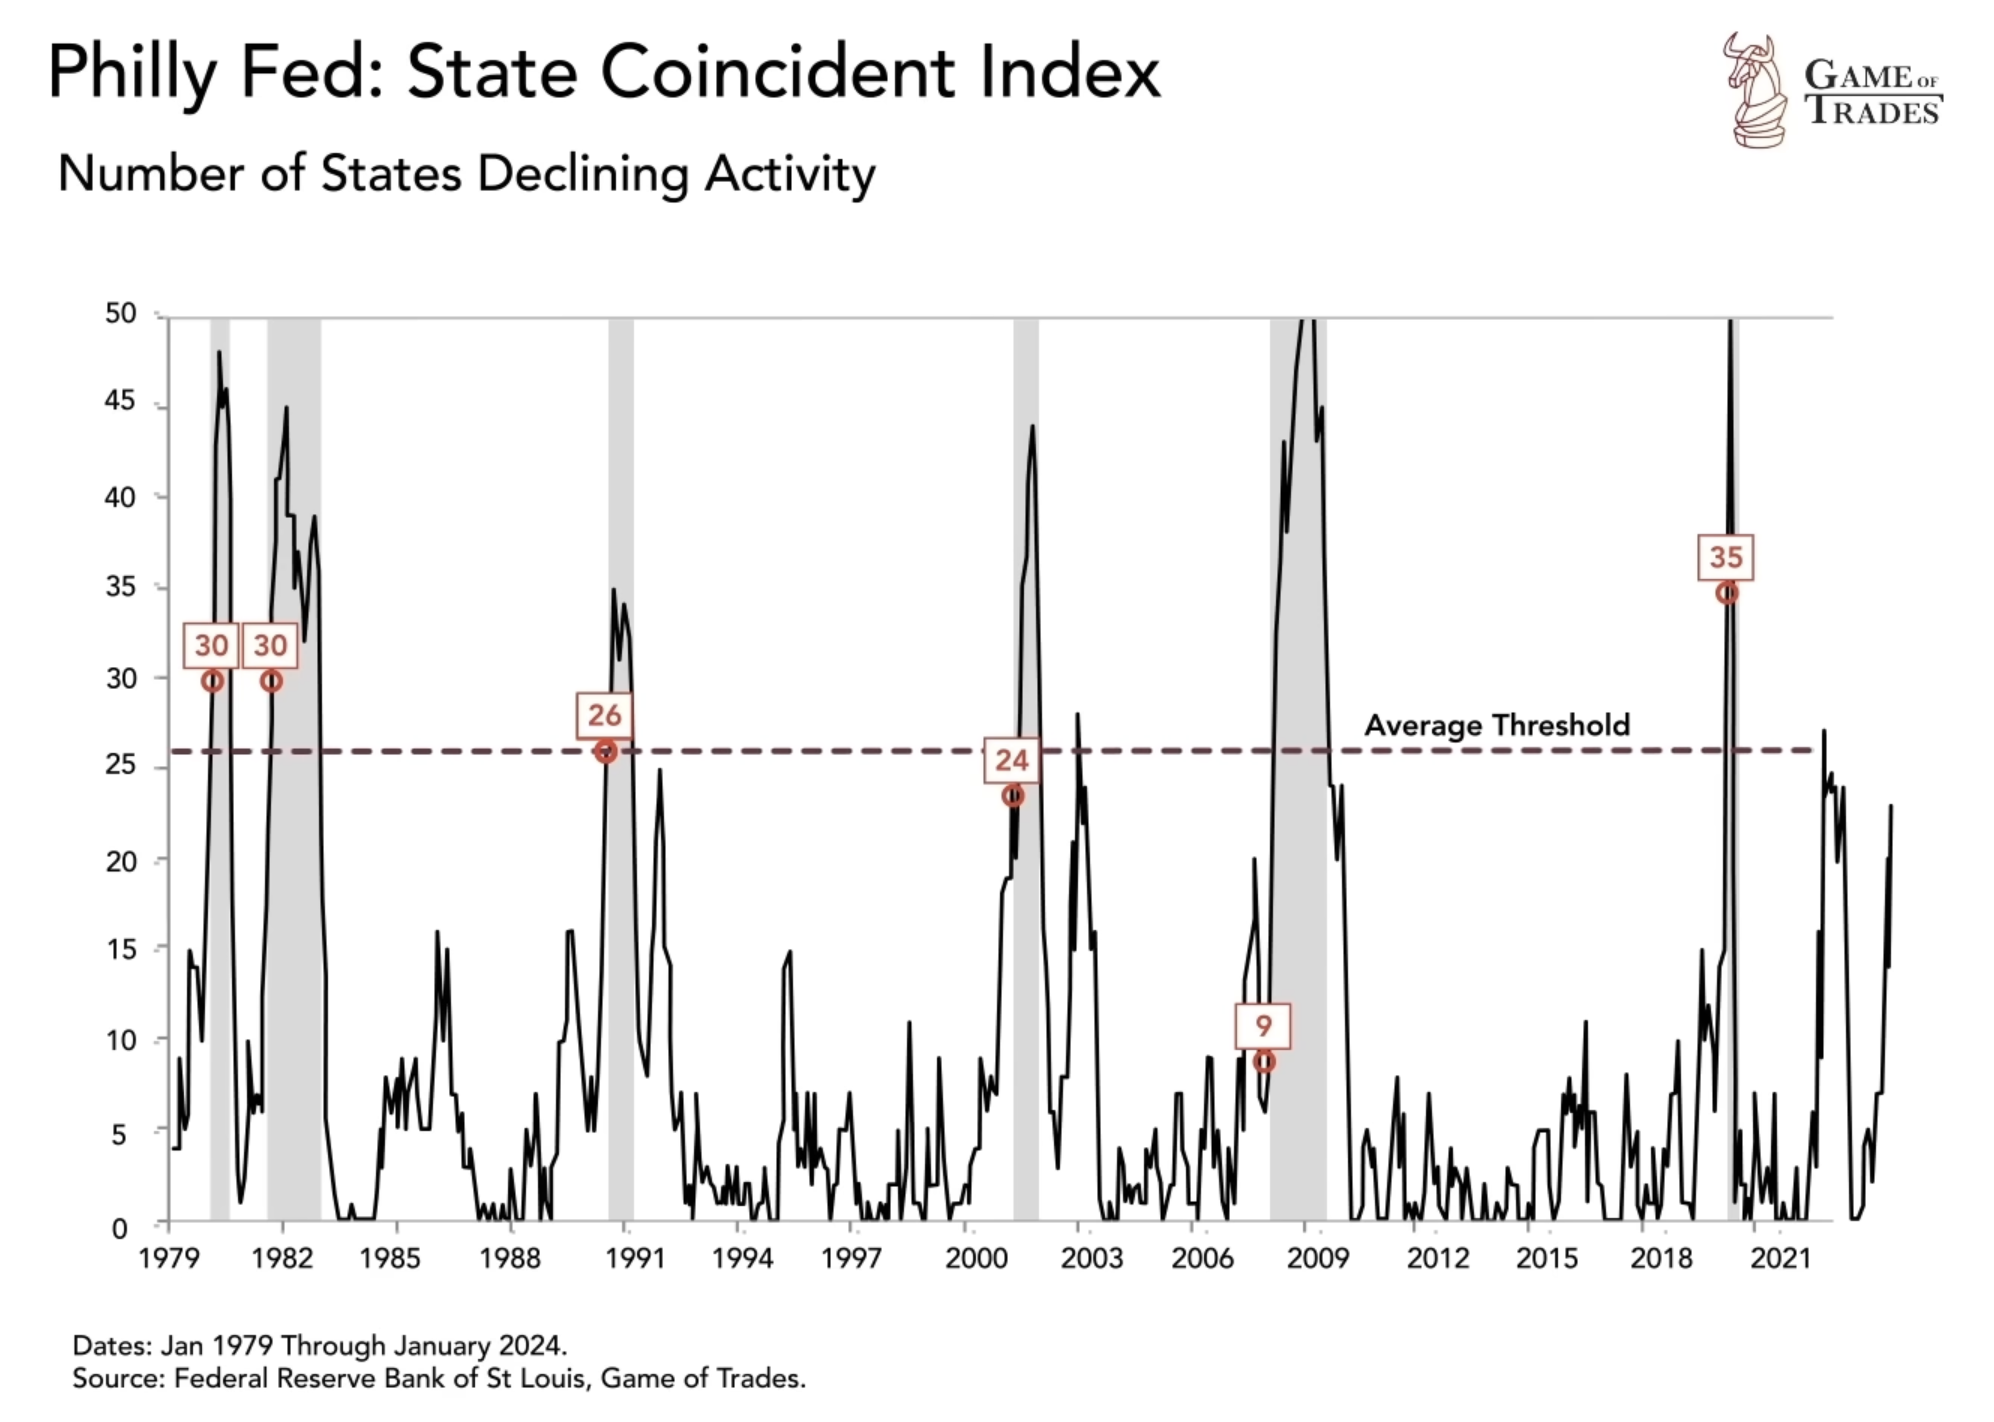 Philly fed: state coincident index